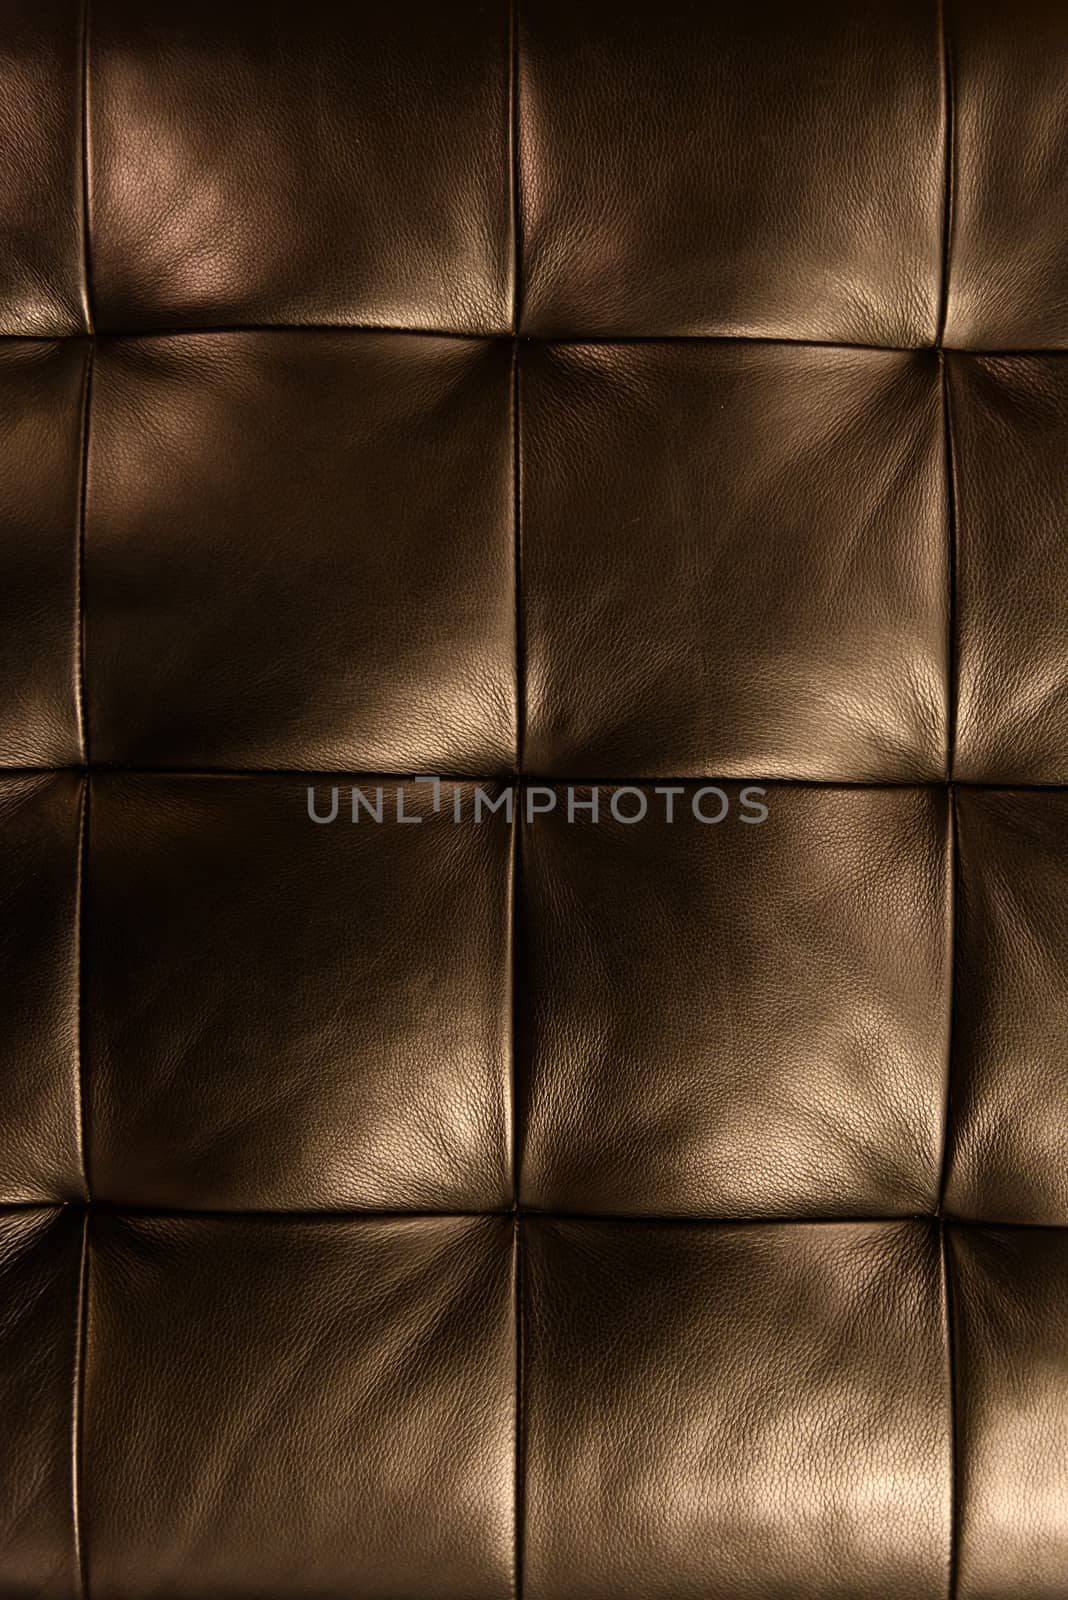 Luxury brown leather close-up background